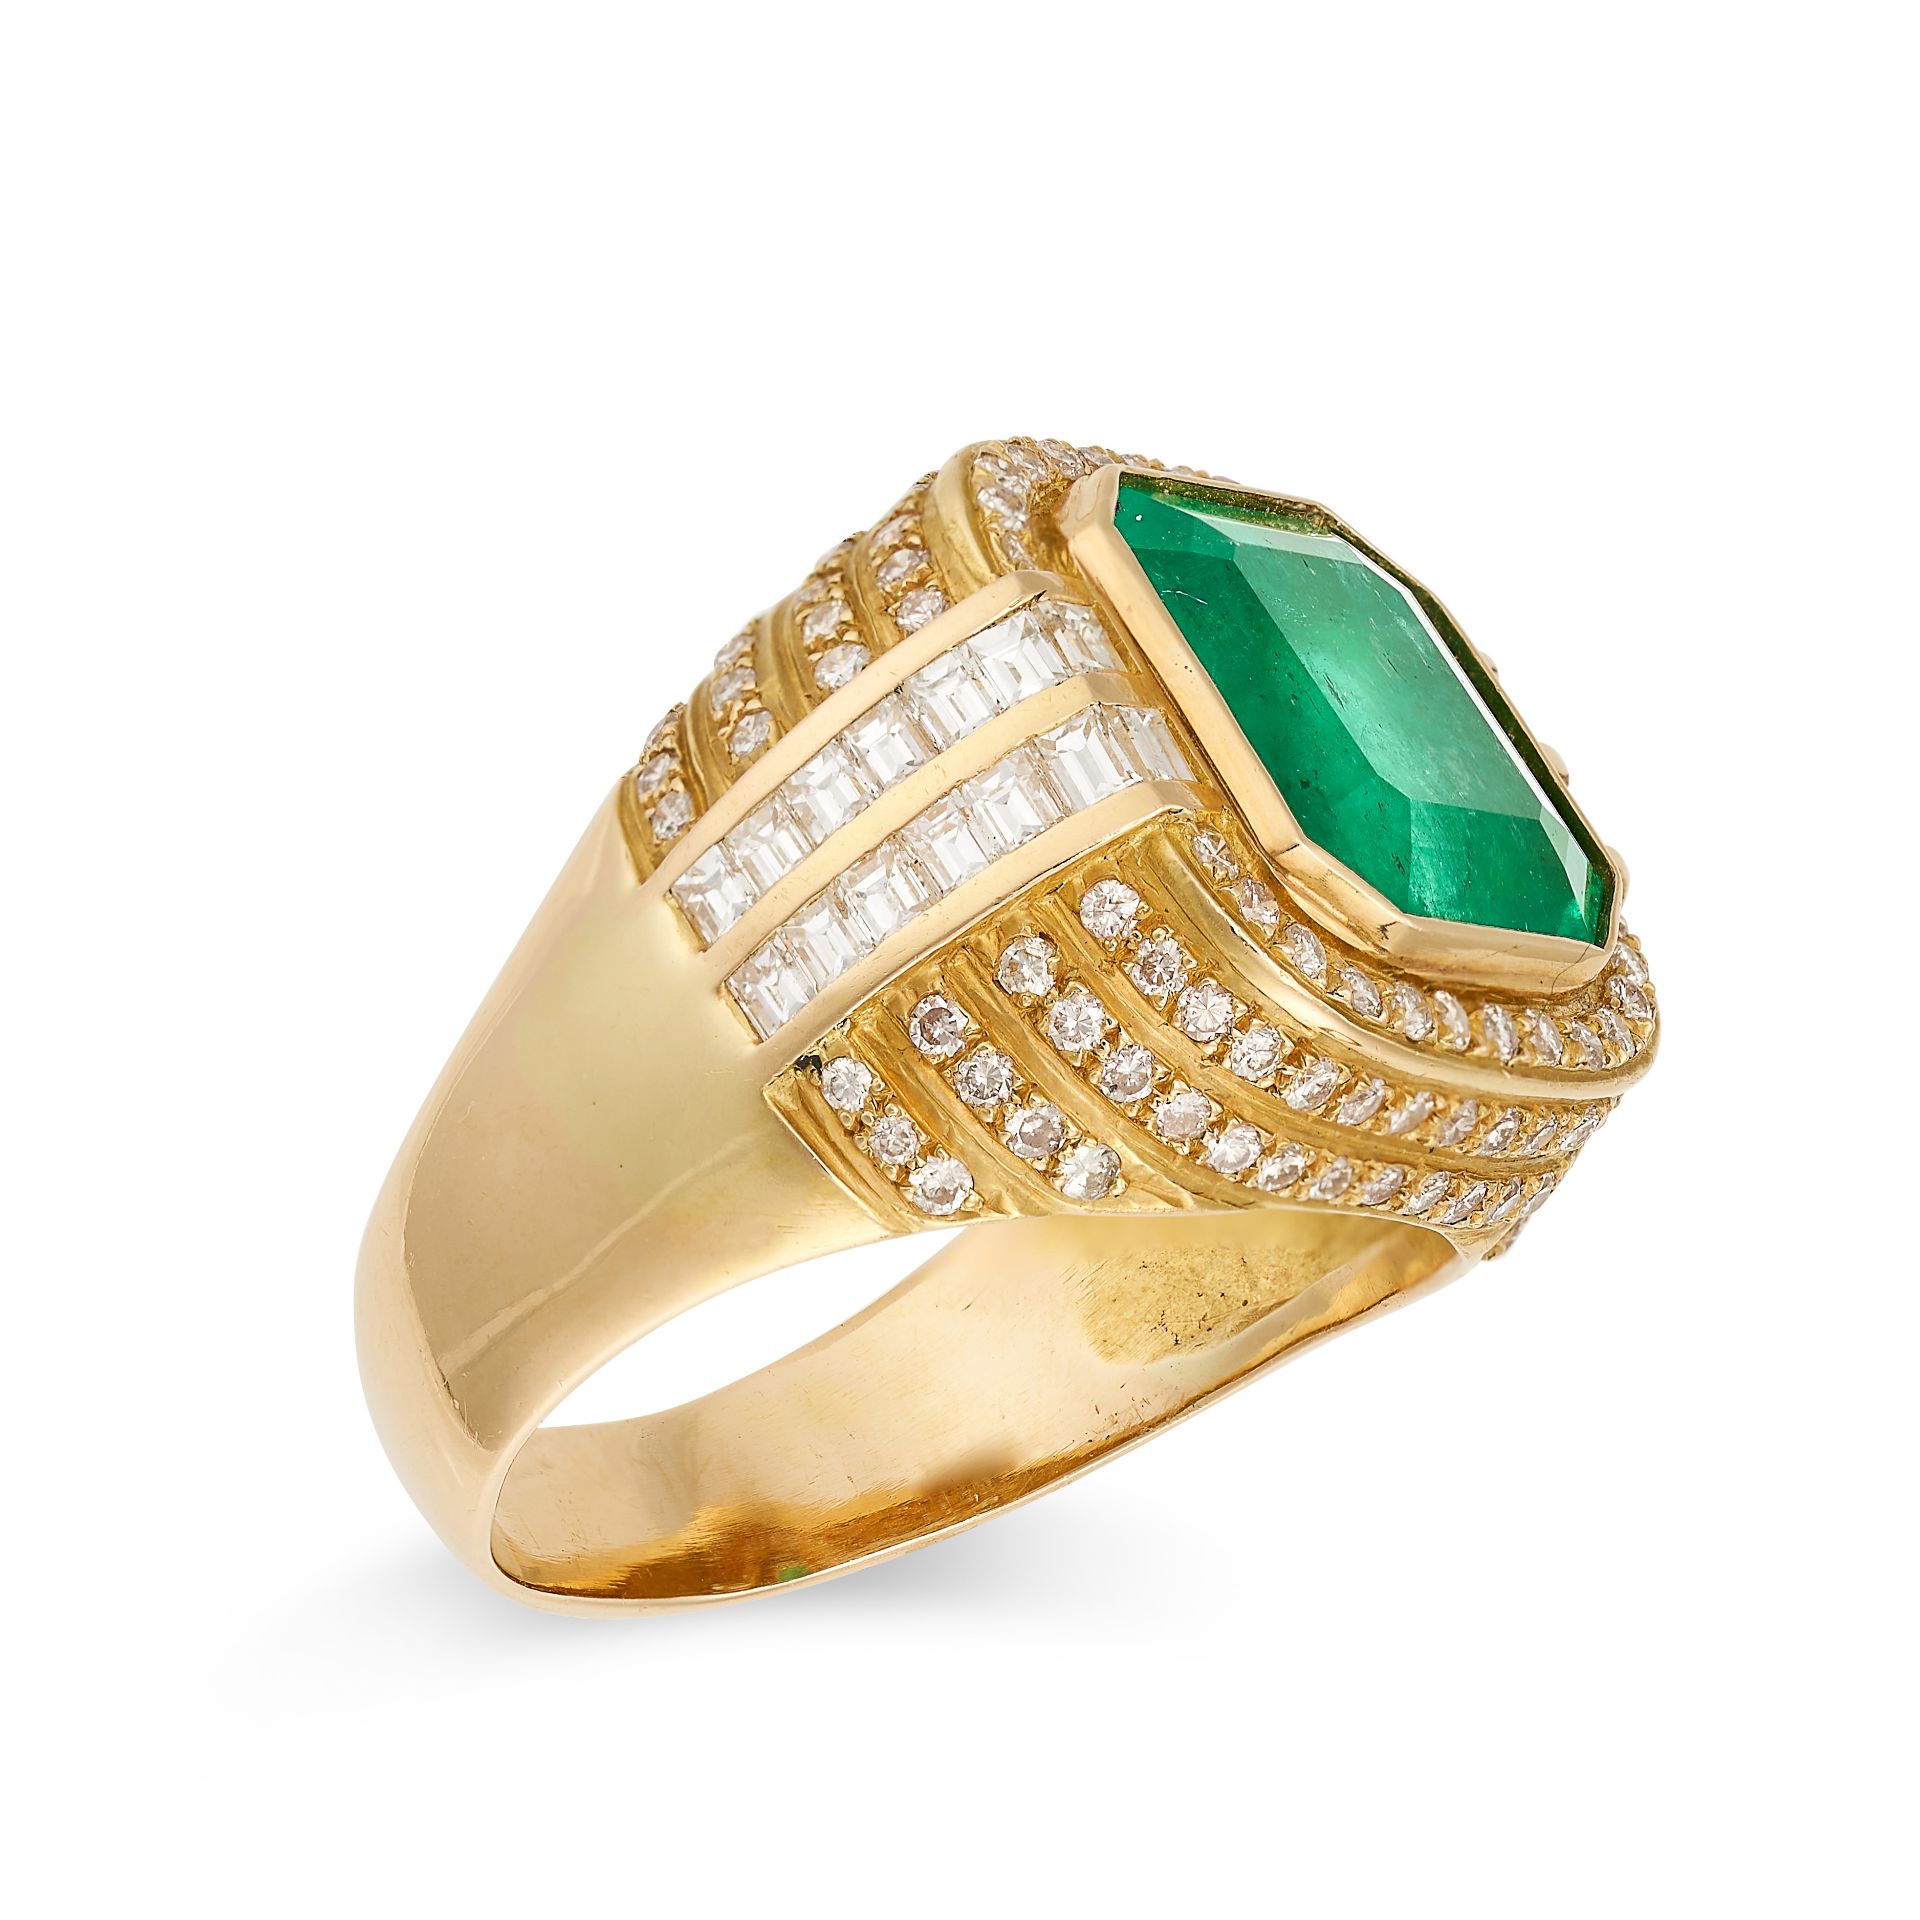 A COLOMBIAN EMERALD AND DIAMOND RING set with an emerald cut emerald of 7.17 carats in a border of - Bild 2 aus 2